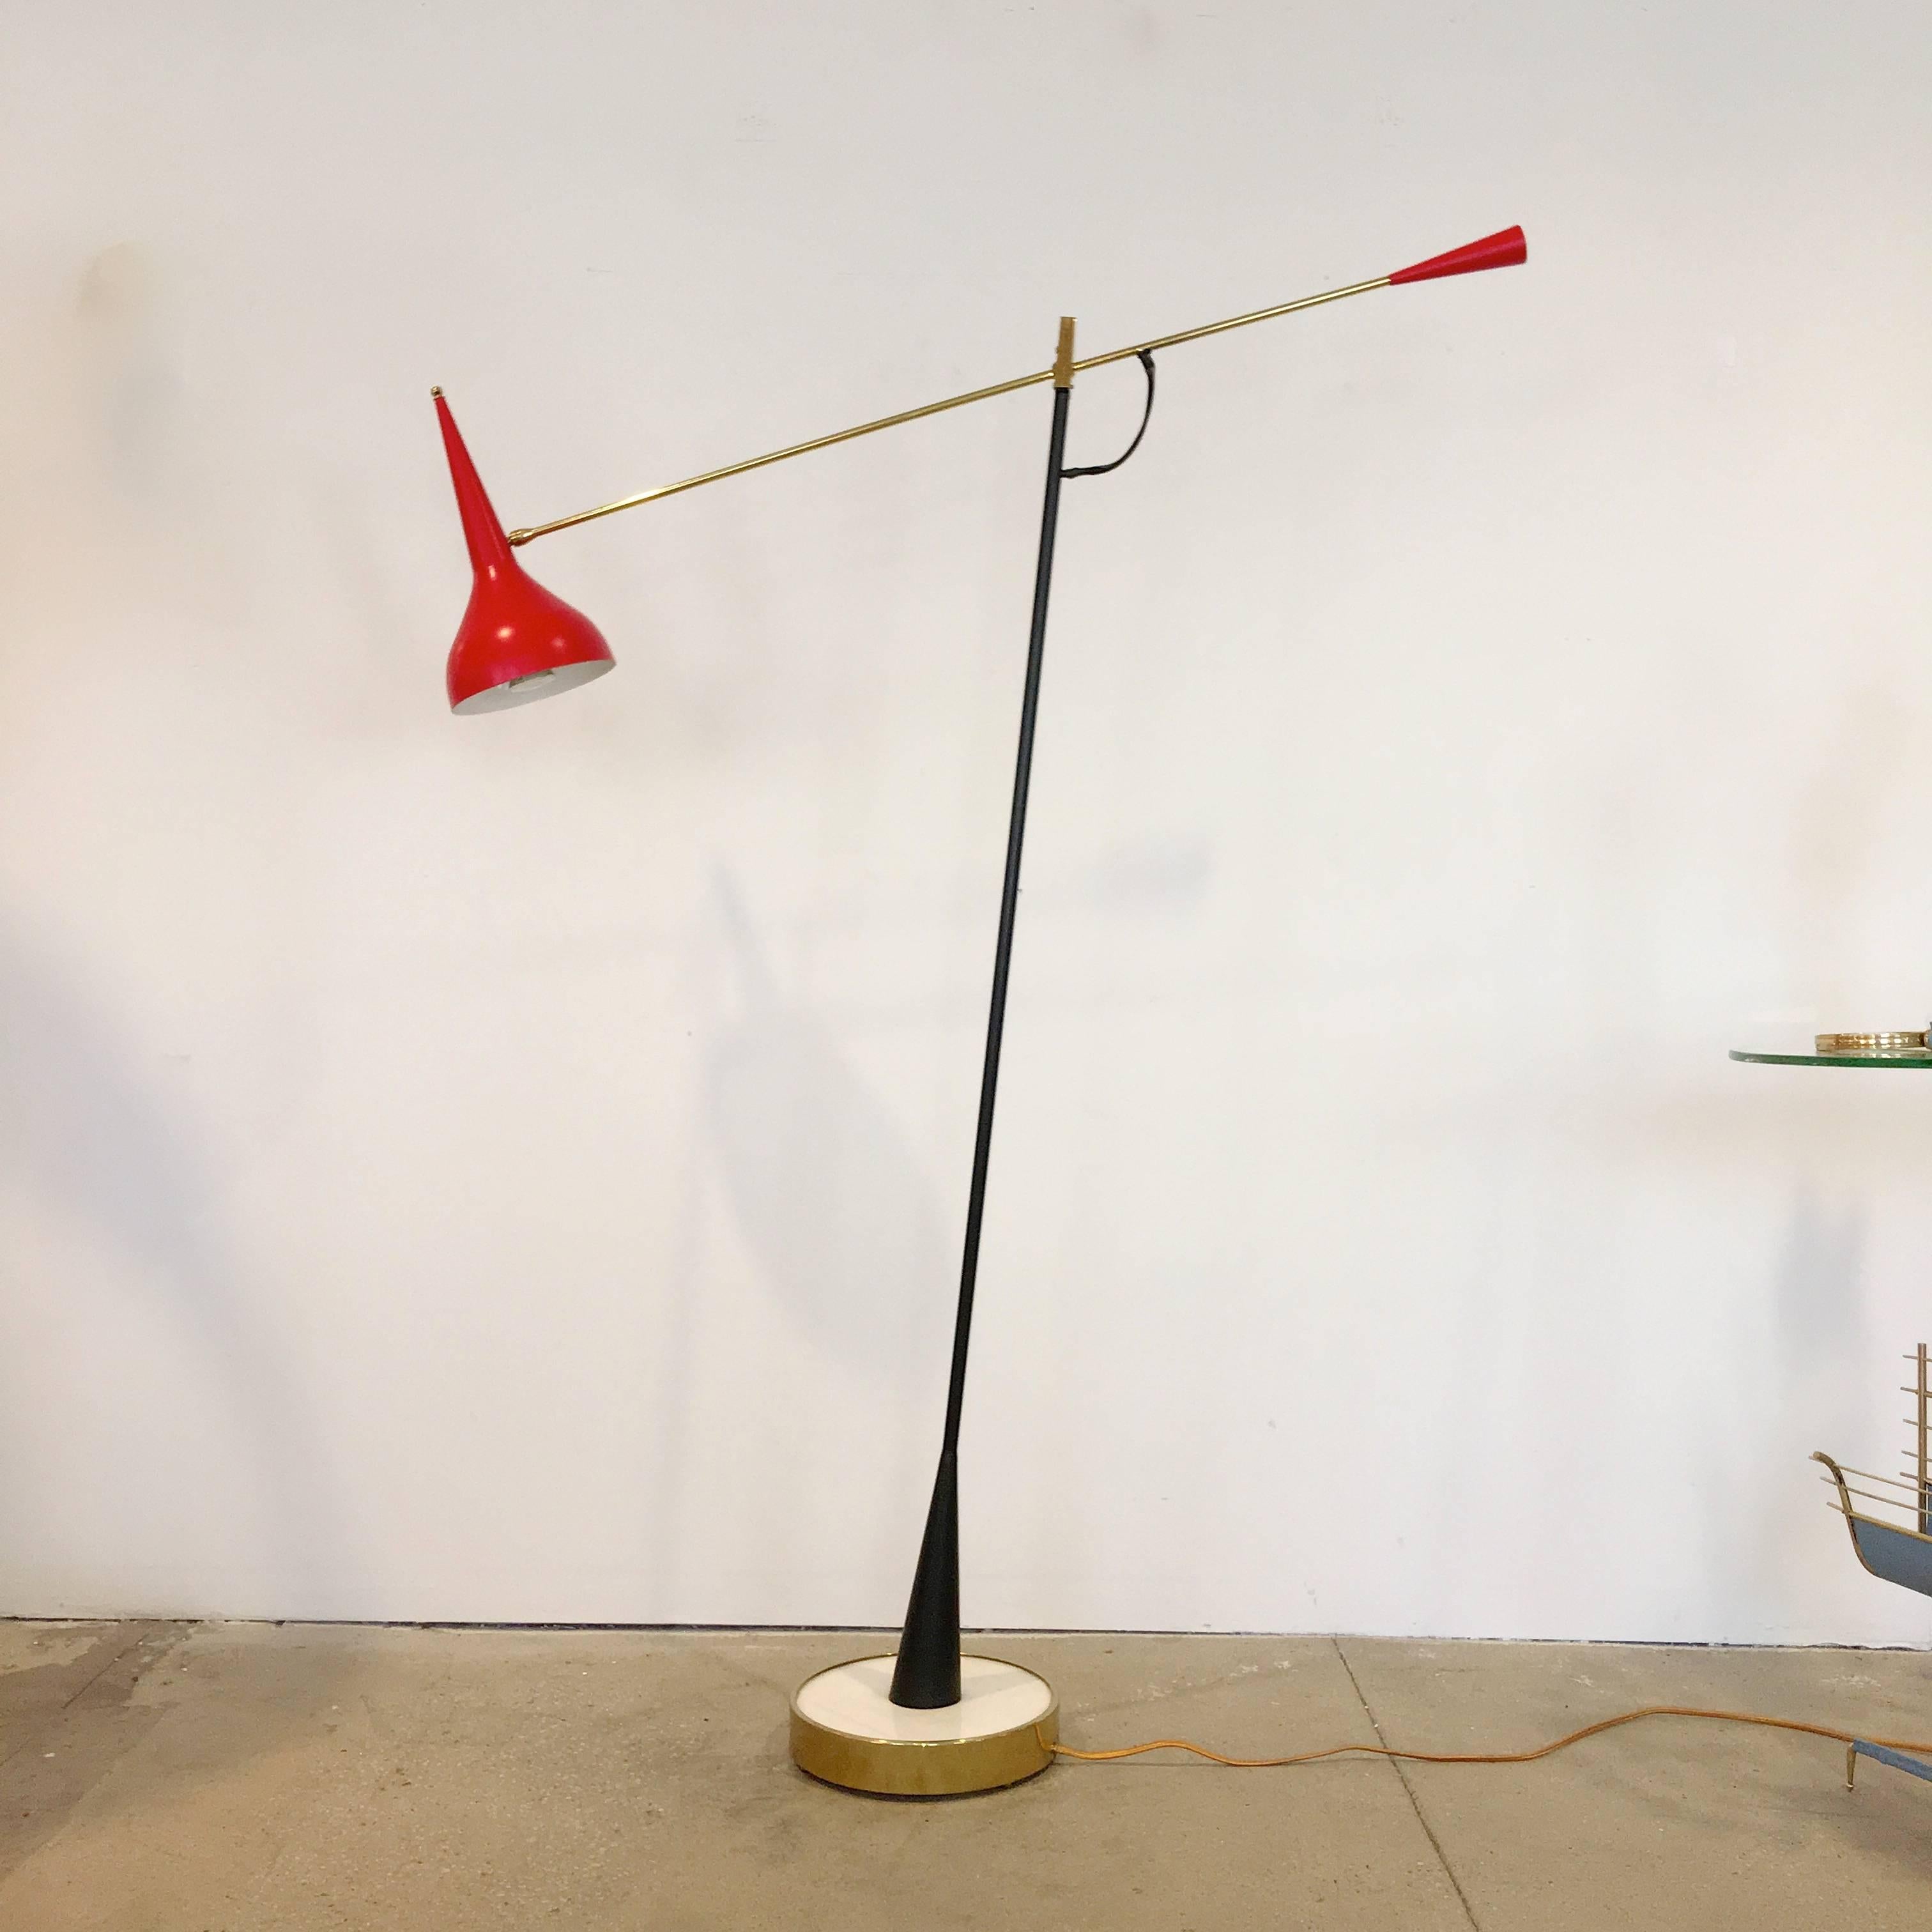 Crafted entirely by hand by our own master metalsmith in our workshop/studio is this articulating floor lamp the design of which was inspired by elements of our favorite Italian lighting from the 1950s including but not limited to Oscar Torlasco,